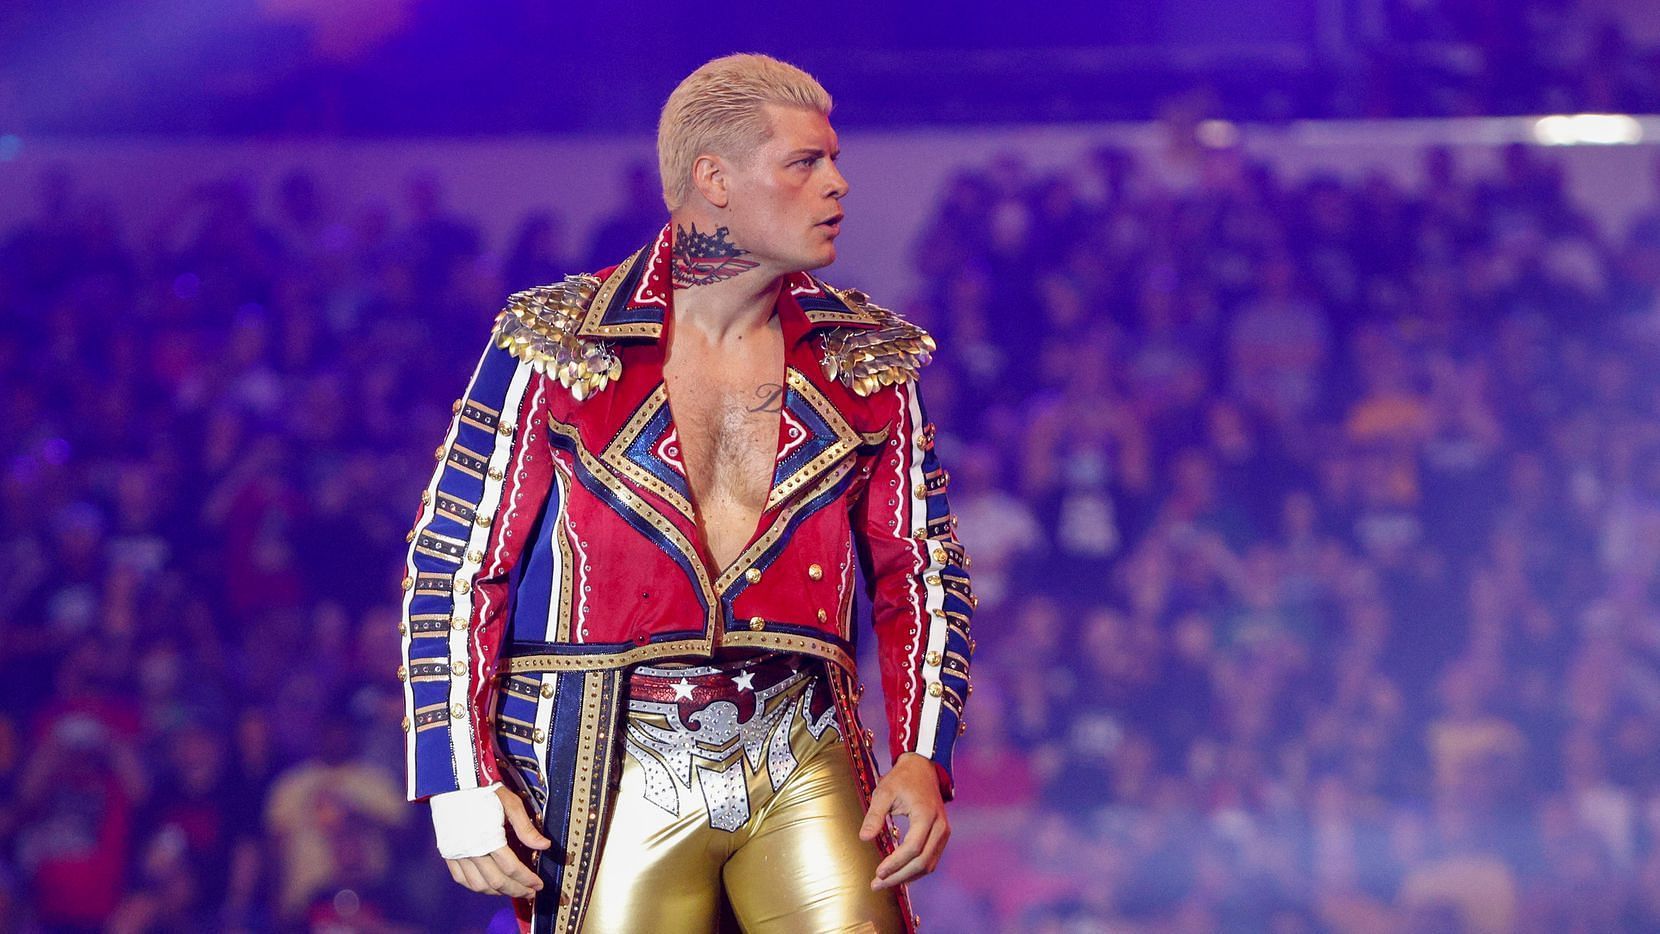 Cody Rhodes is a former Intercontinental Champion